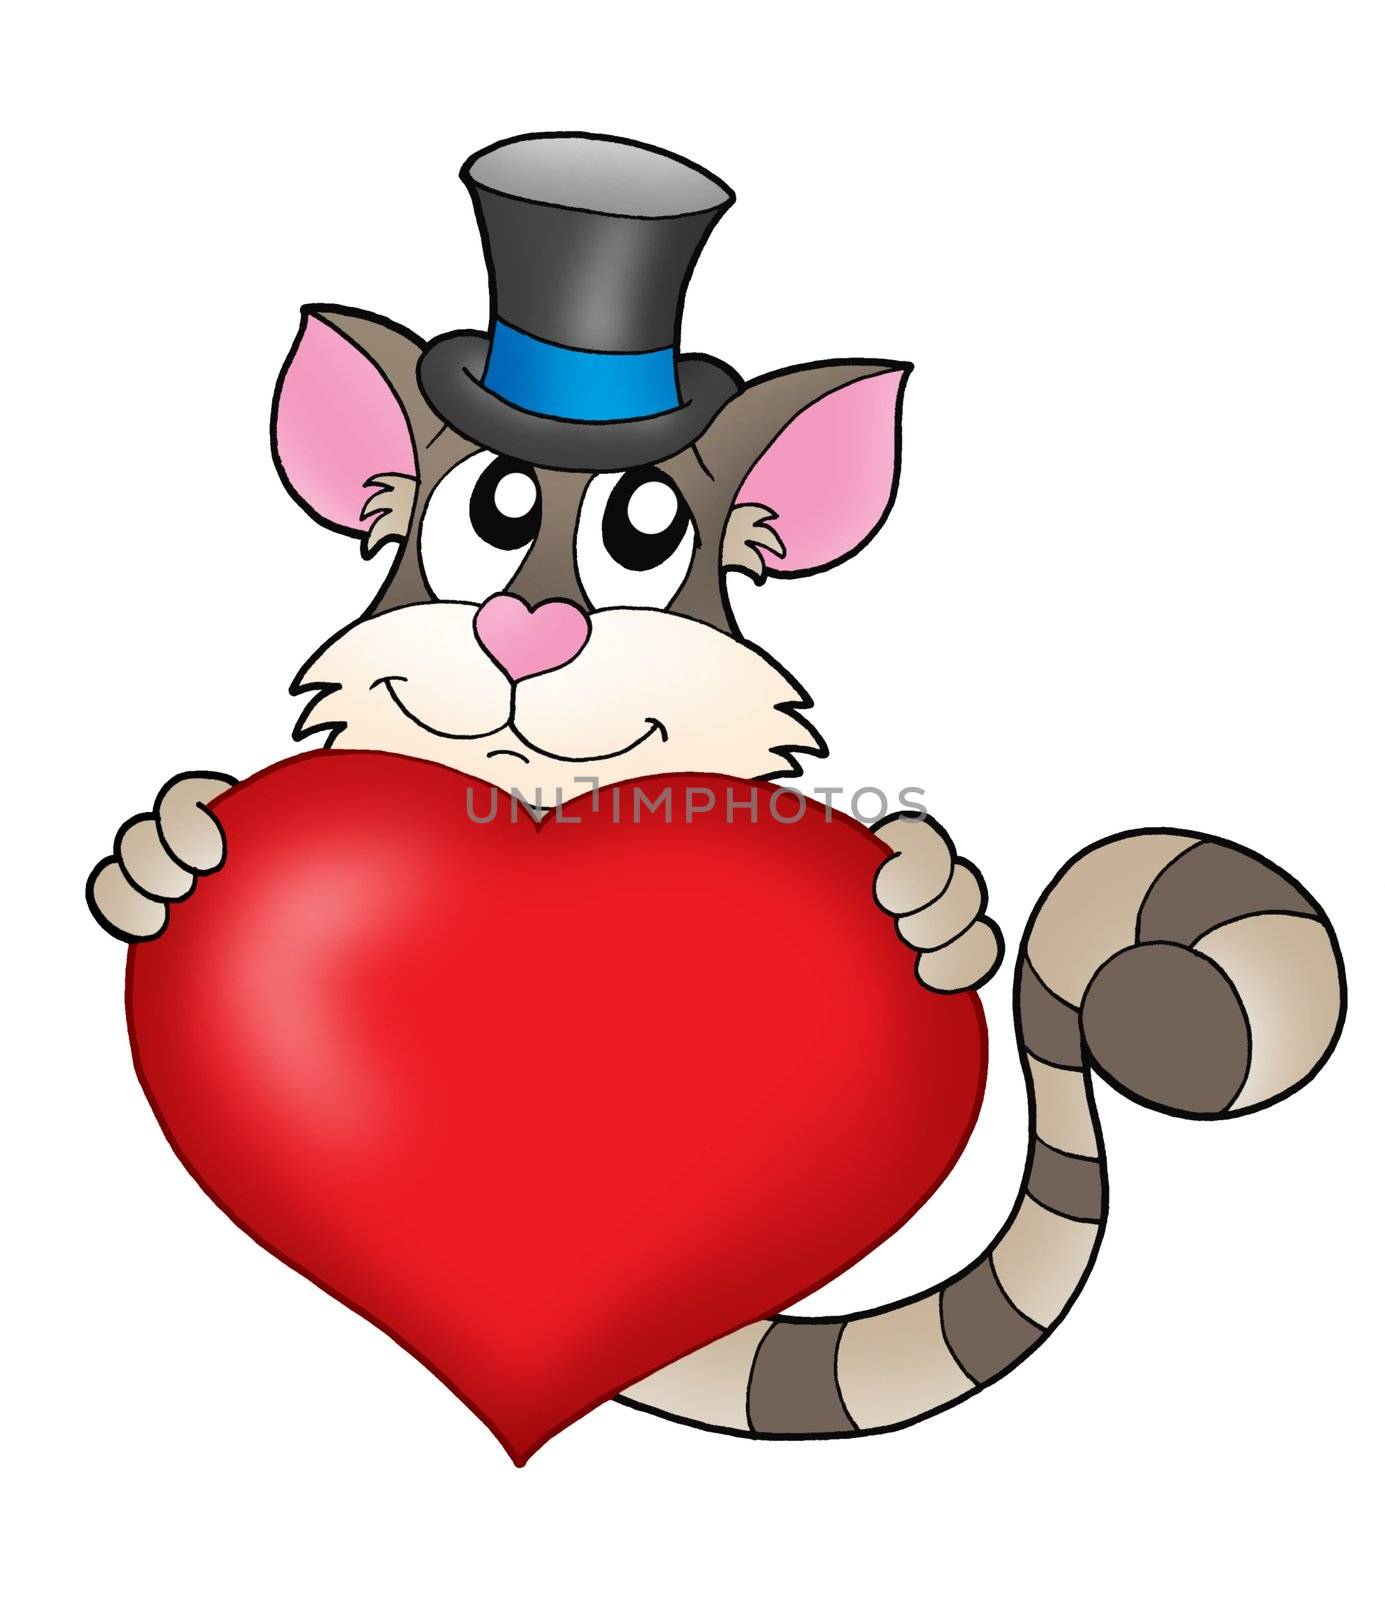 Tom cat with heart - color illustration.